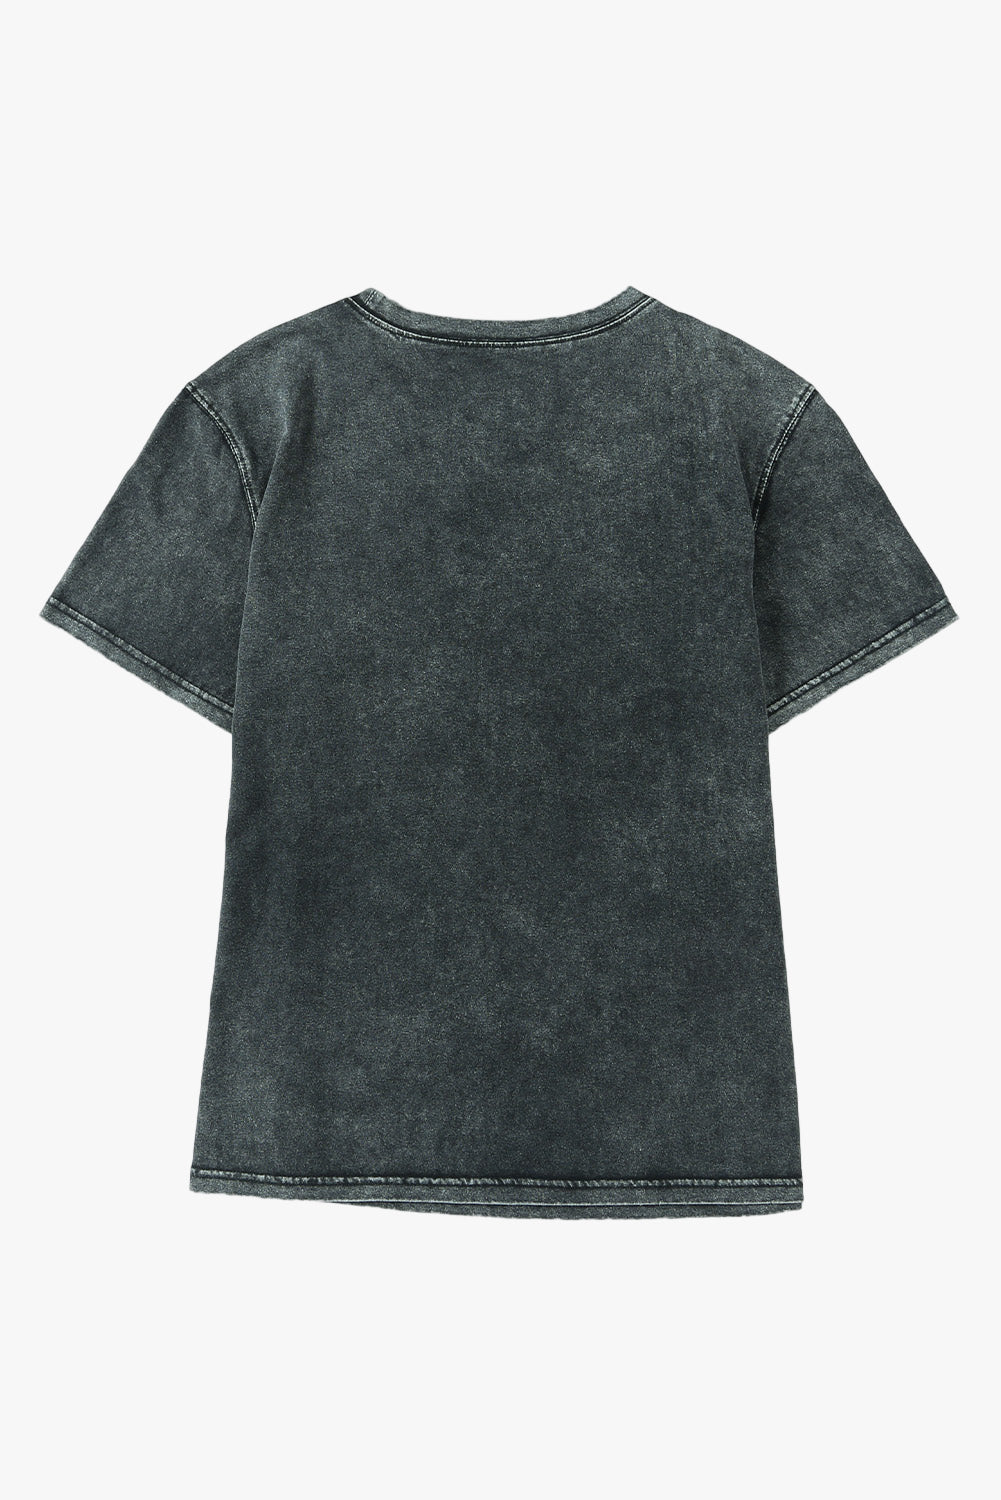 Black Mineral Washed Casual Short Sleeve Tee